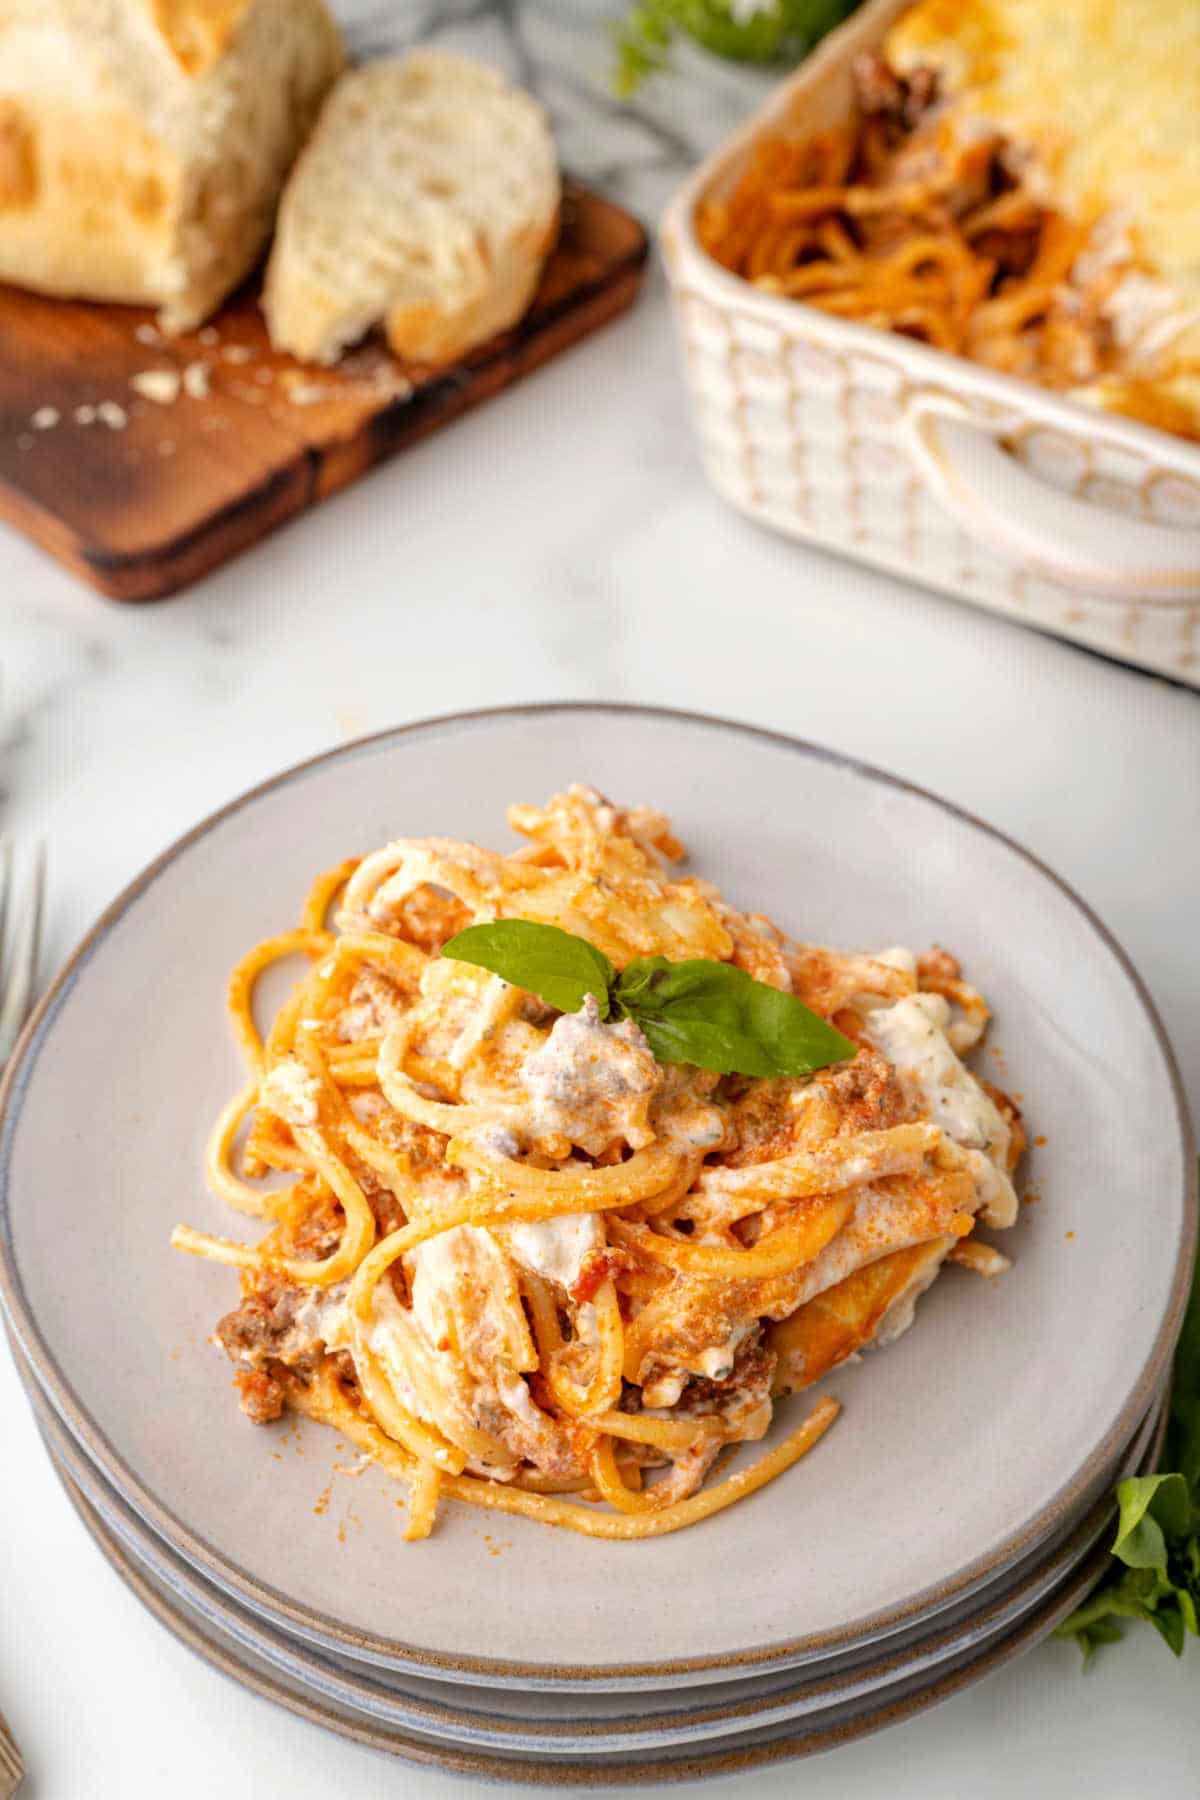 Baked spaghetti on a plate next to a loaf of bread and a casserole pan.